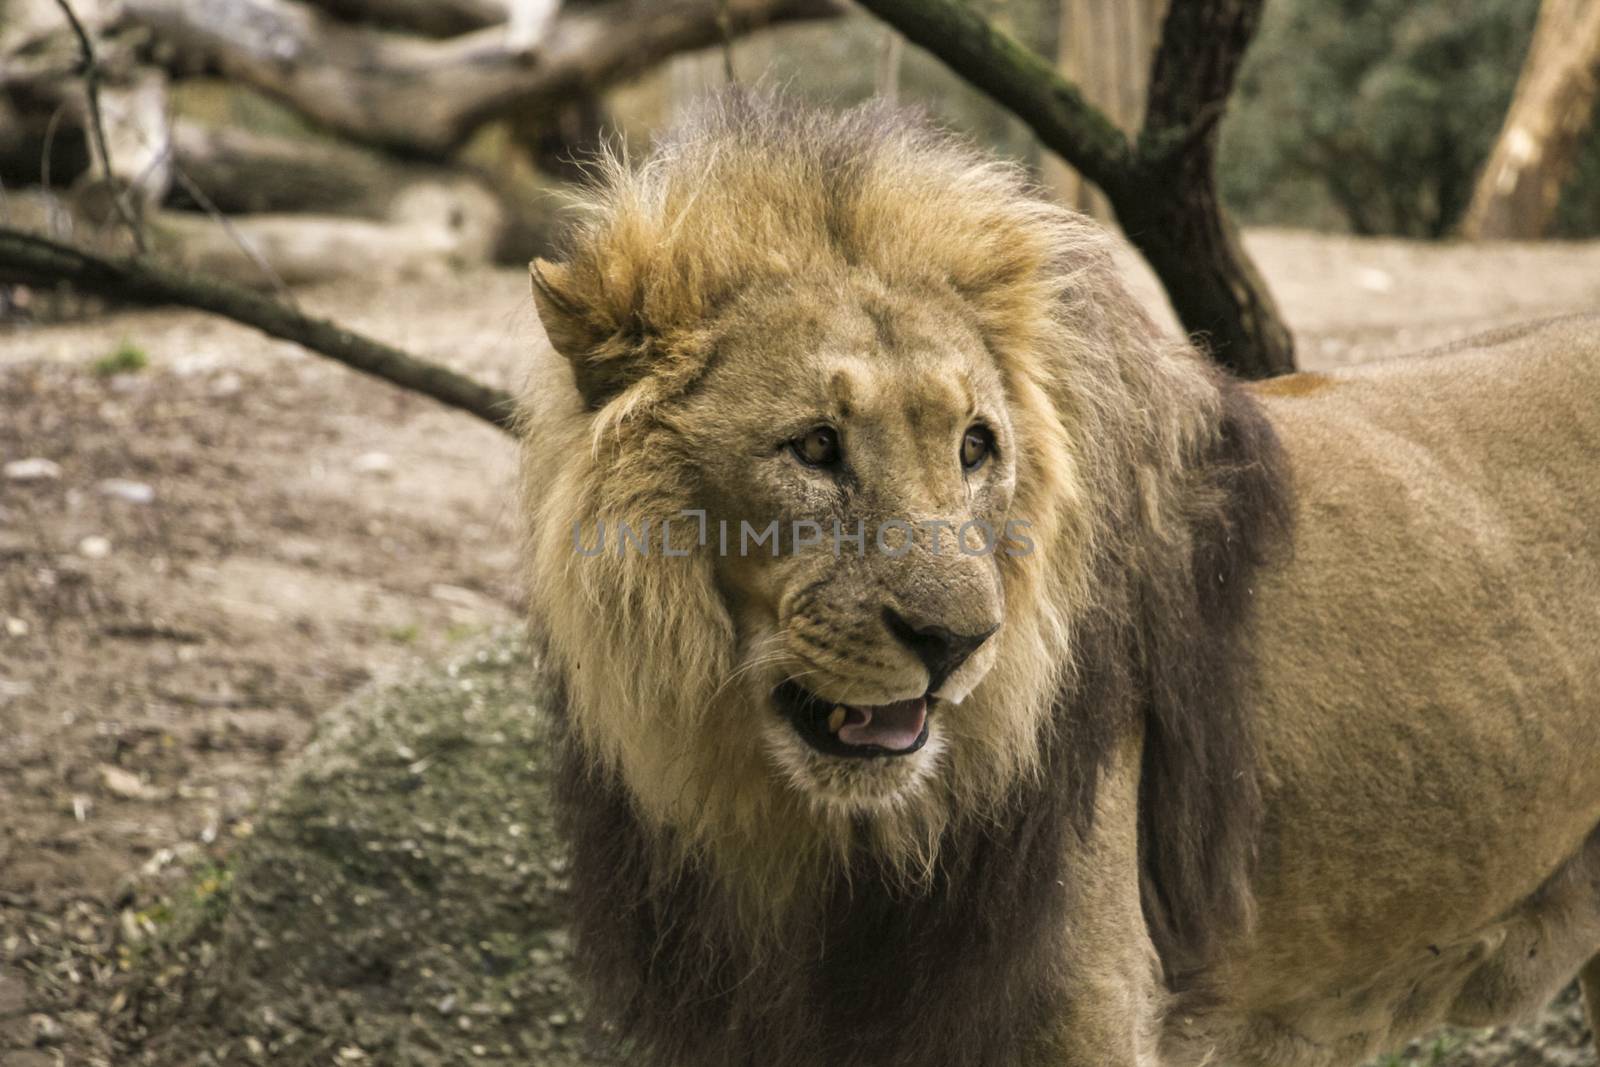 lion in a zoo resting and playing in a natural environment